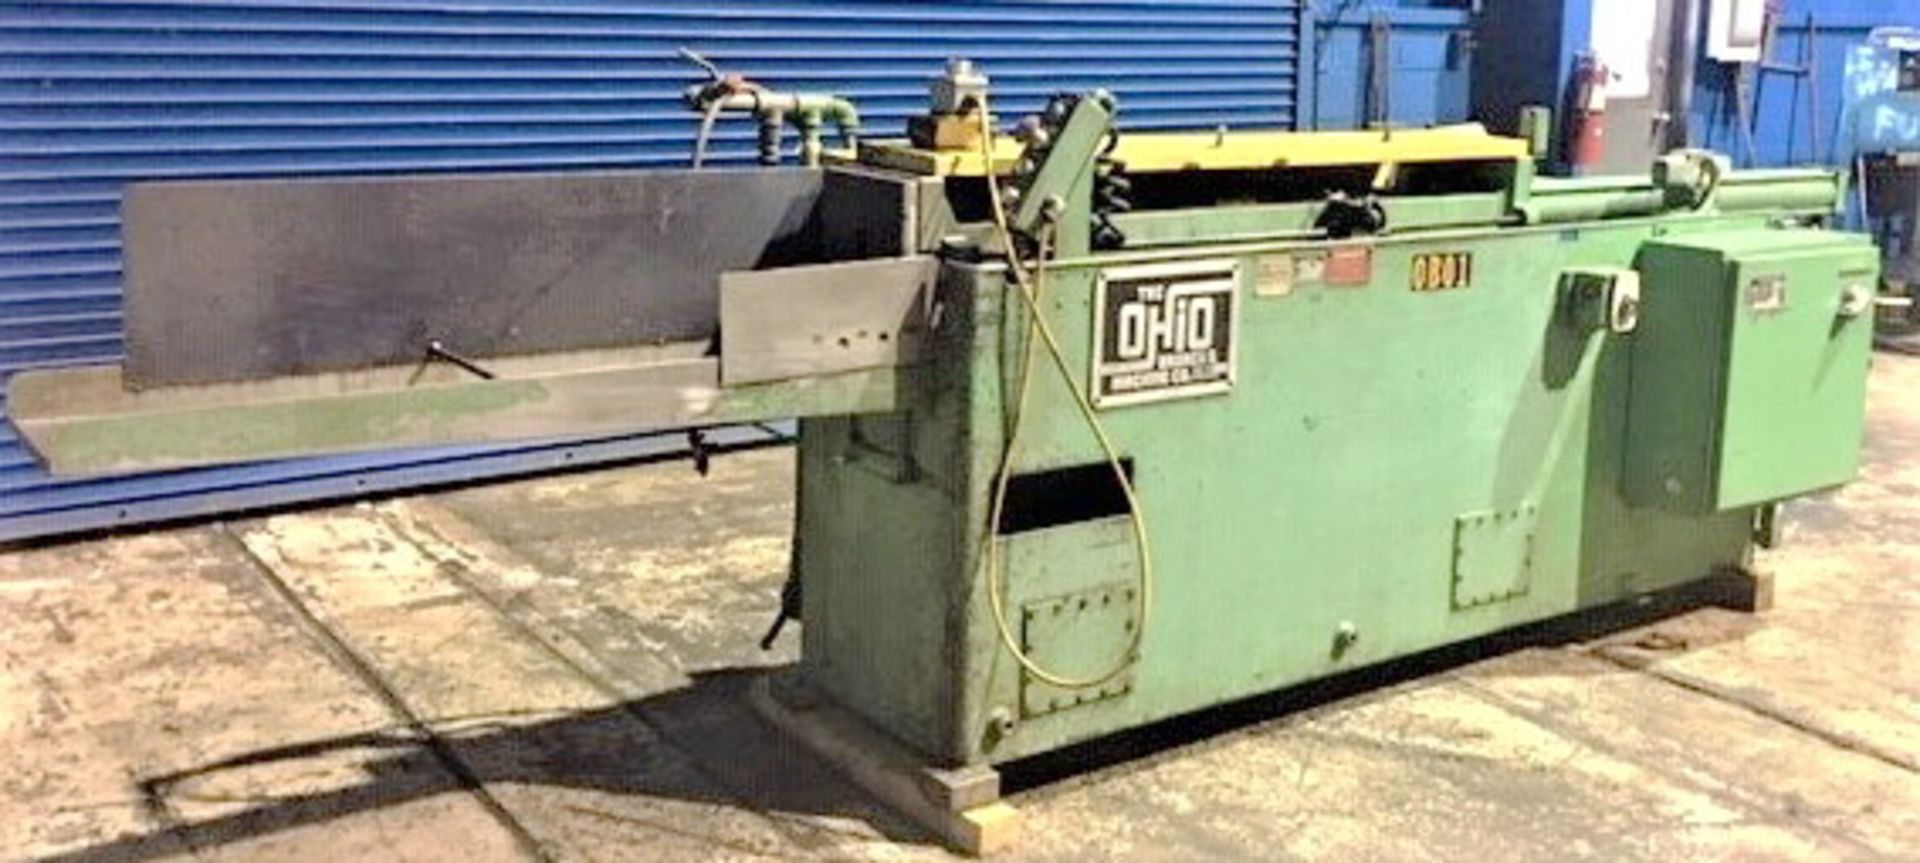 Ohio Horizontal Broaching Machine | 5 Ton x 48", Mdl: H548RR, S/N: 18125-76, Located In: - Image 3 of 15